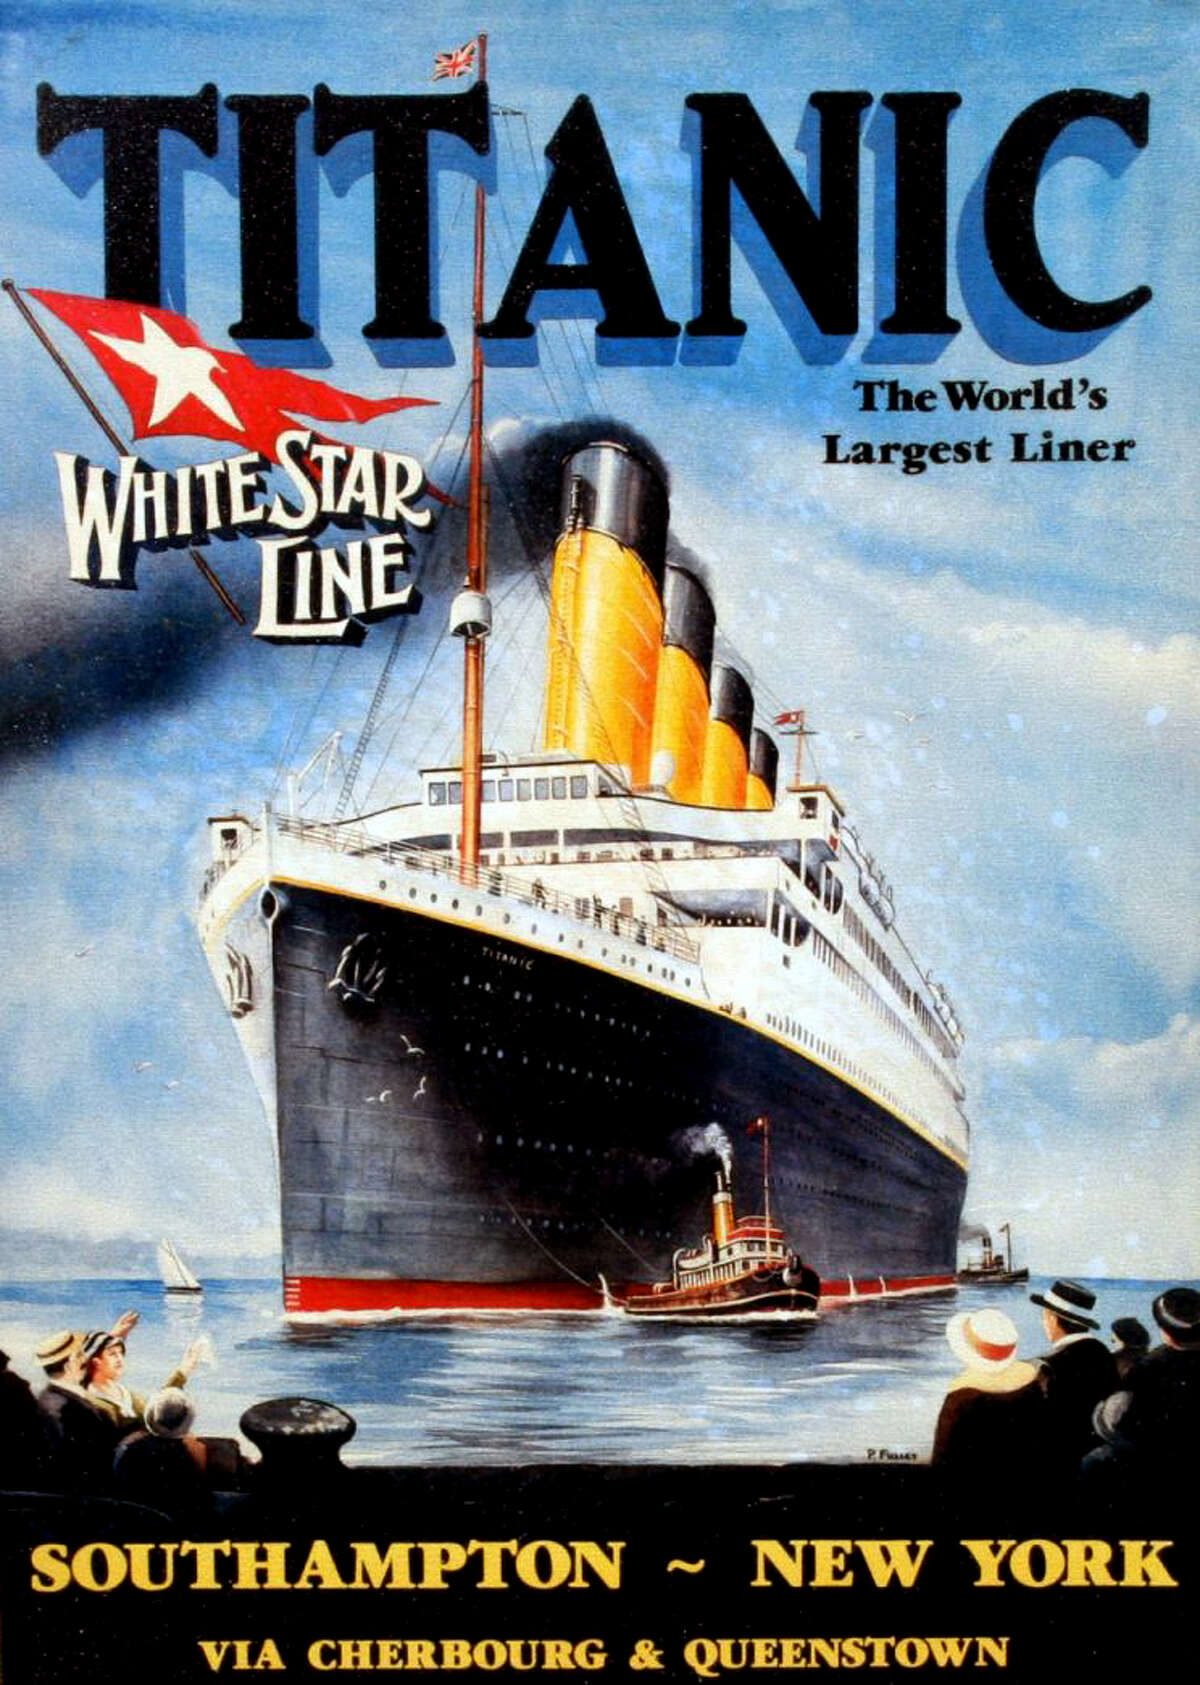 FILE -- A poster advertising the RMS Titanic's maiden voyage. The largest ship afloat at the time, the Titanic sank in the north Atlantic Ocean on April 15, 1912, after colliding with an iceberg during her maiden voyage from Southampton to New York City.  (The New York Times)